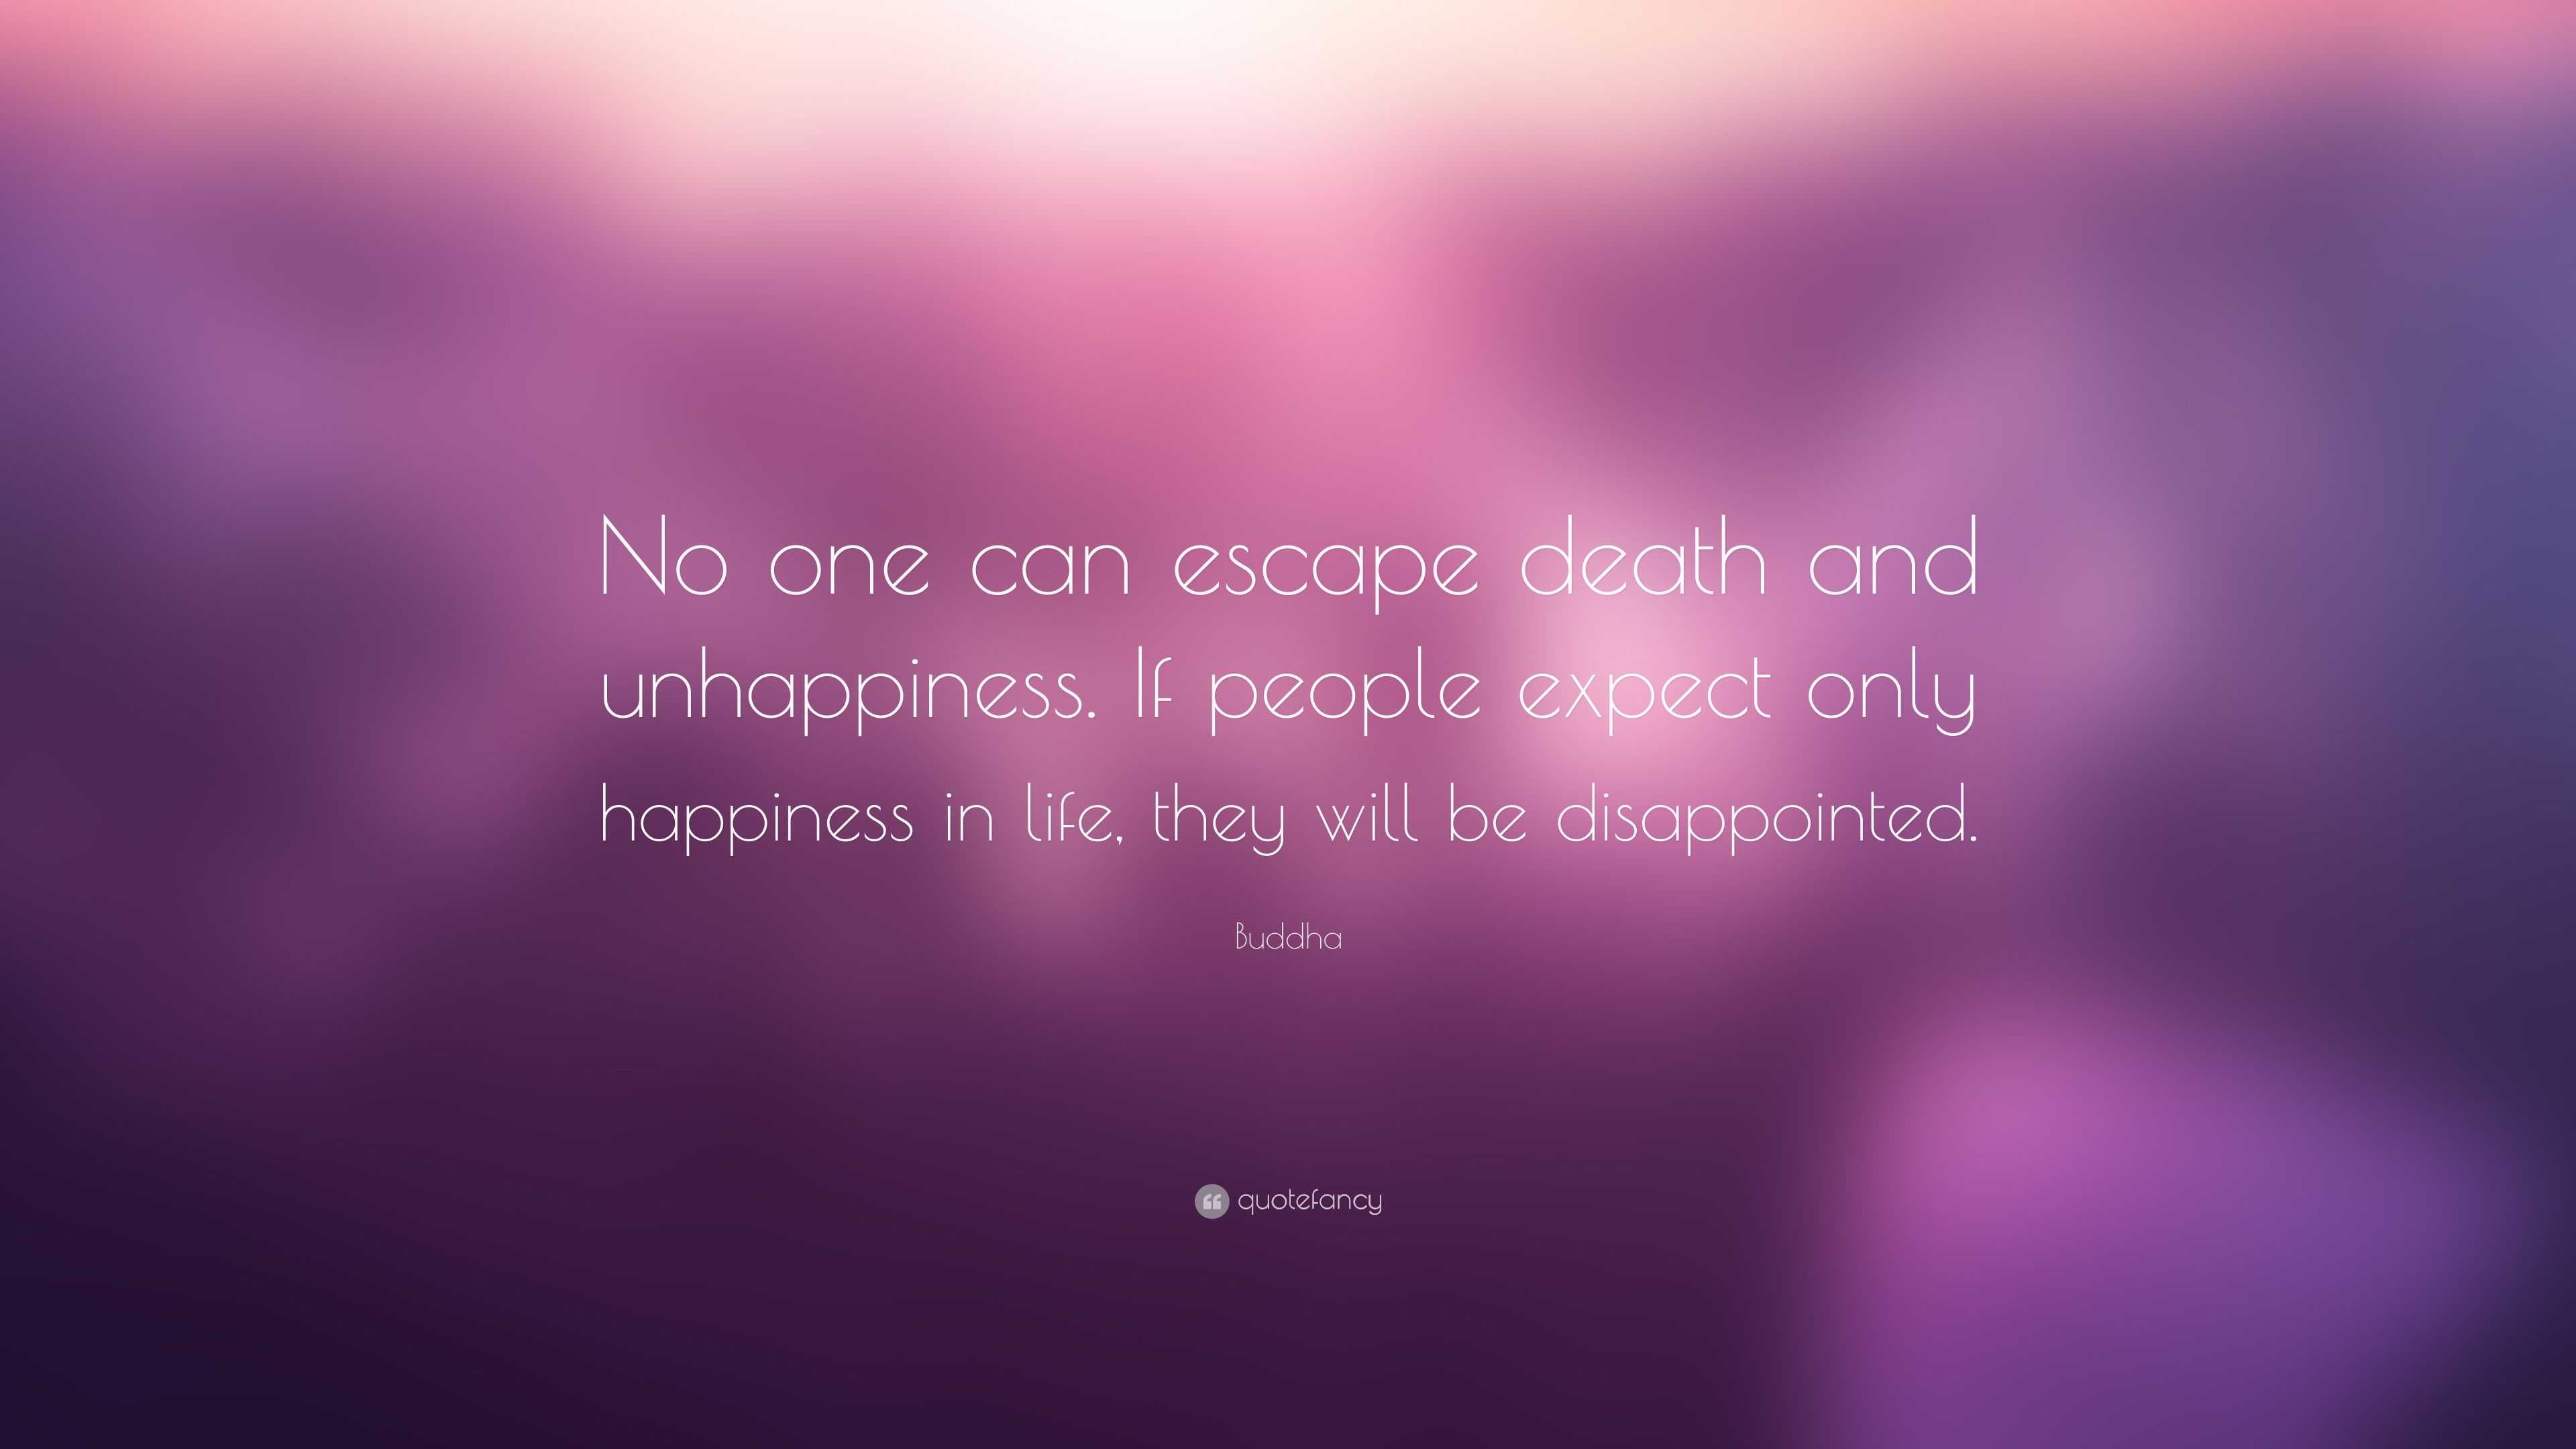 Buddha Quote “No one can escape and unhappiness If people expect only